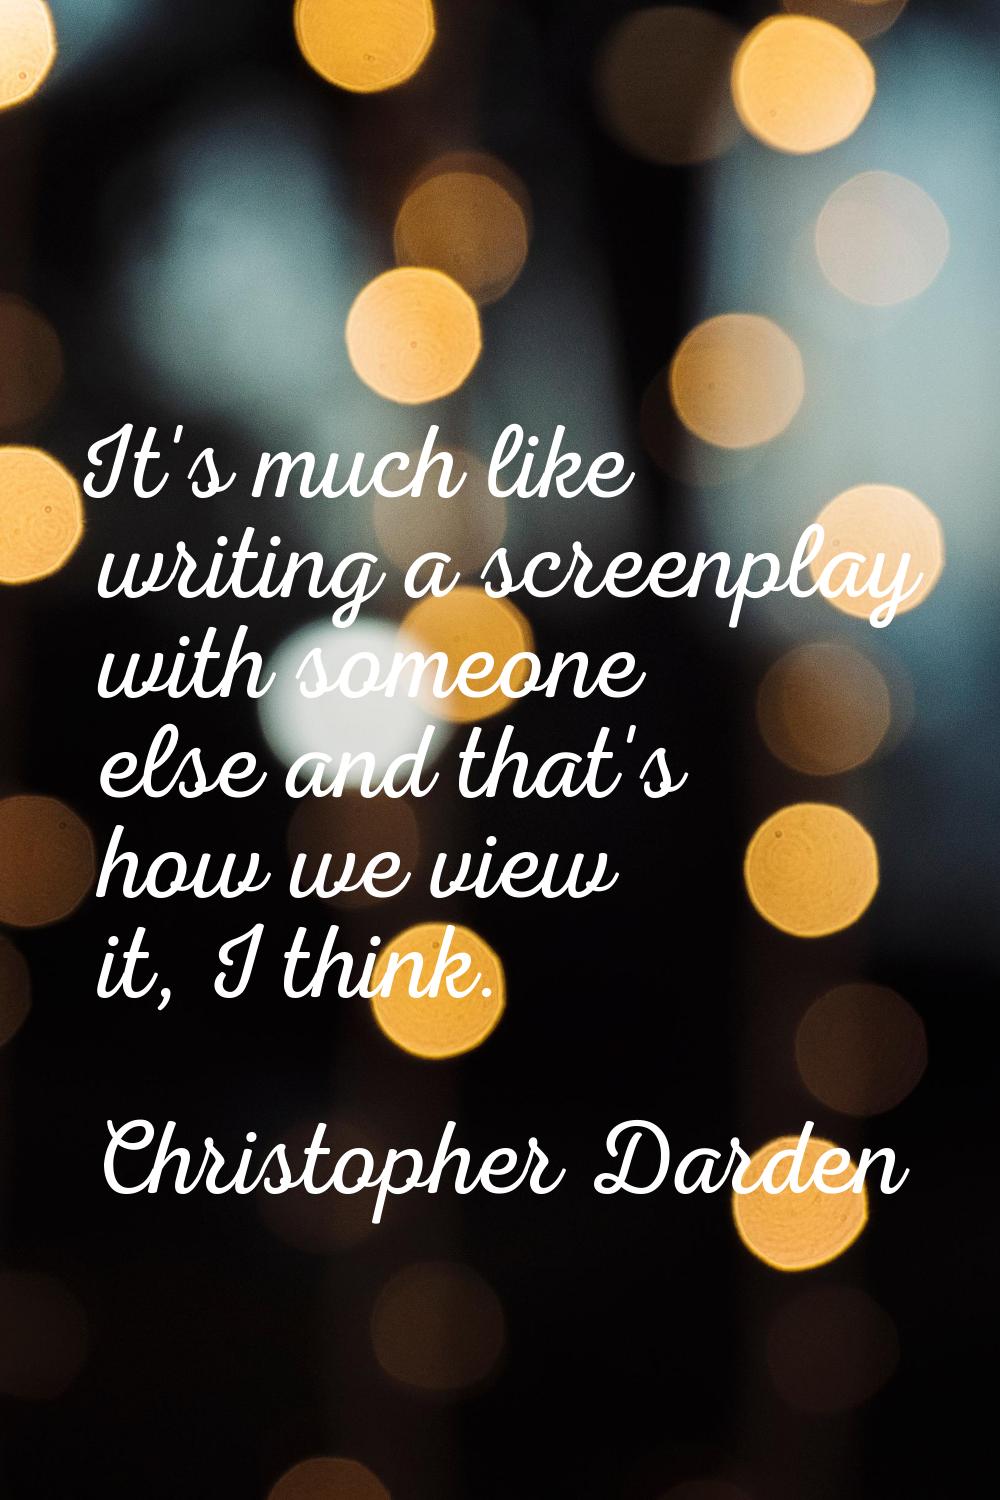 It's much like writing a screenplay with someone else and that's how we view it, I think.